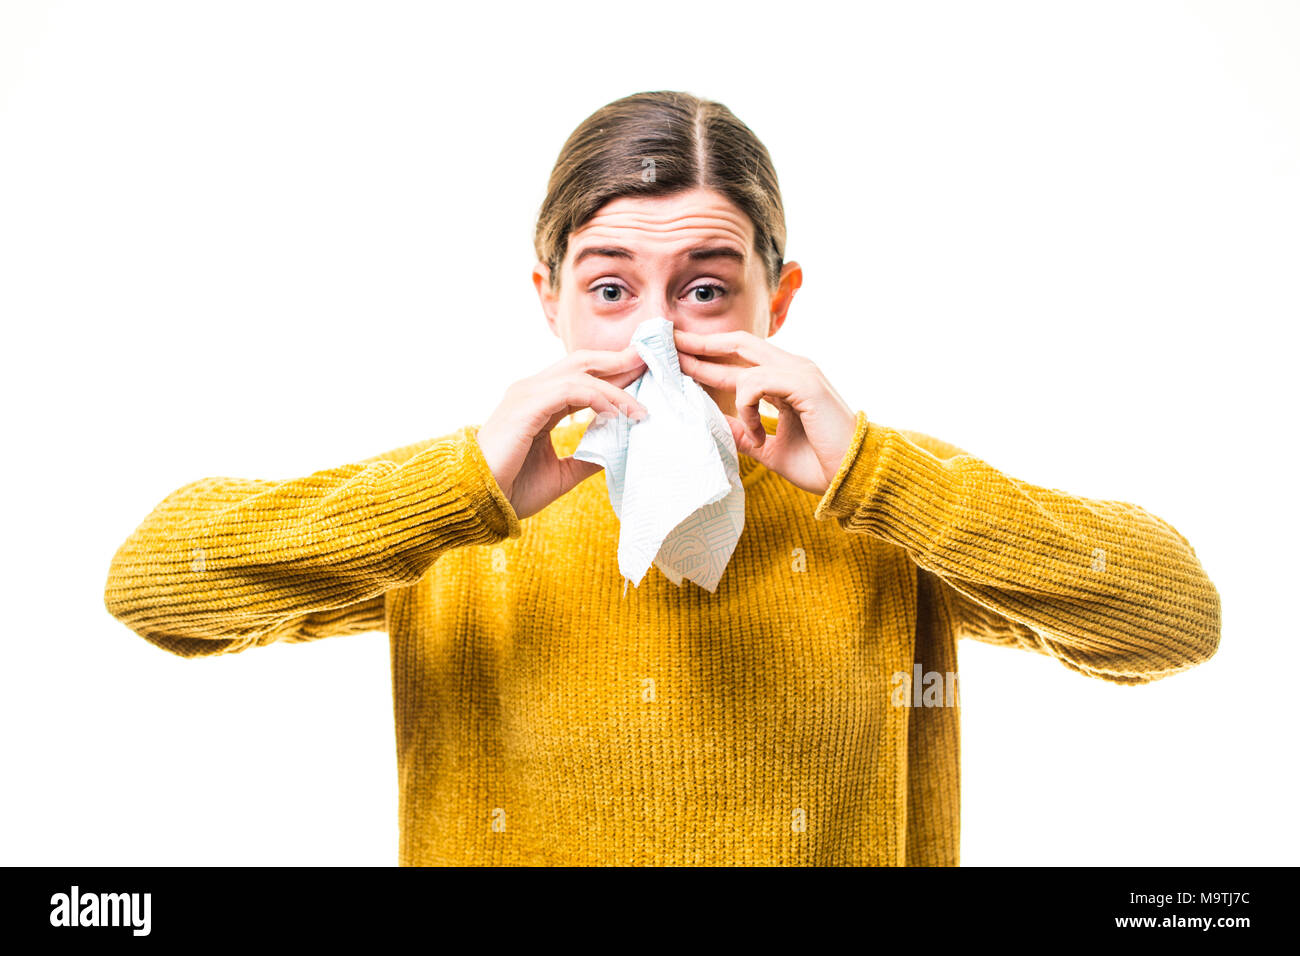 A young Caucasian woman girl wearing a yellow jumper sweater,  suffering from cold or influenza, sneezing ,  blowing her nose into a paper handkerchief, UK Stock Photo